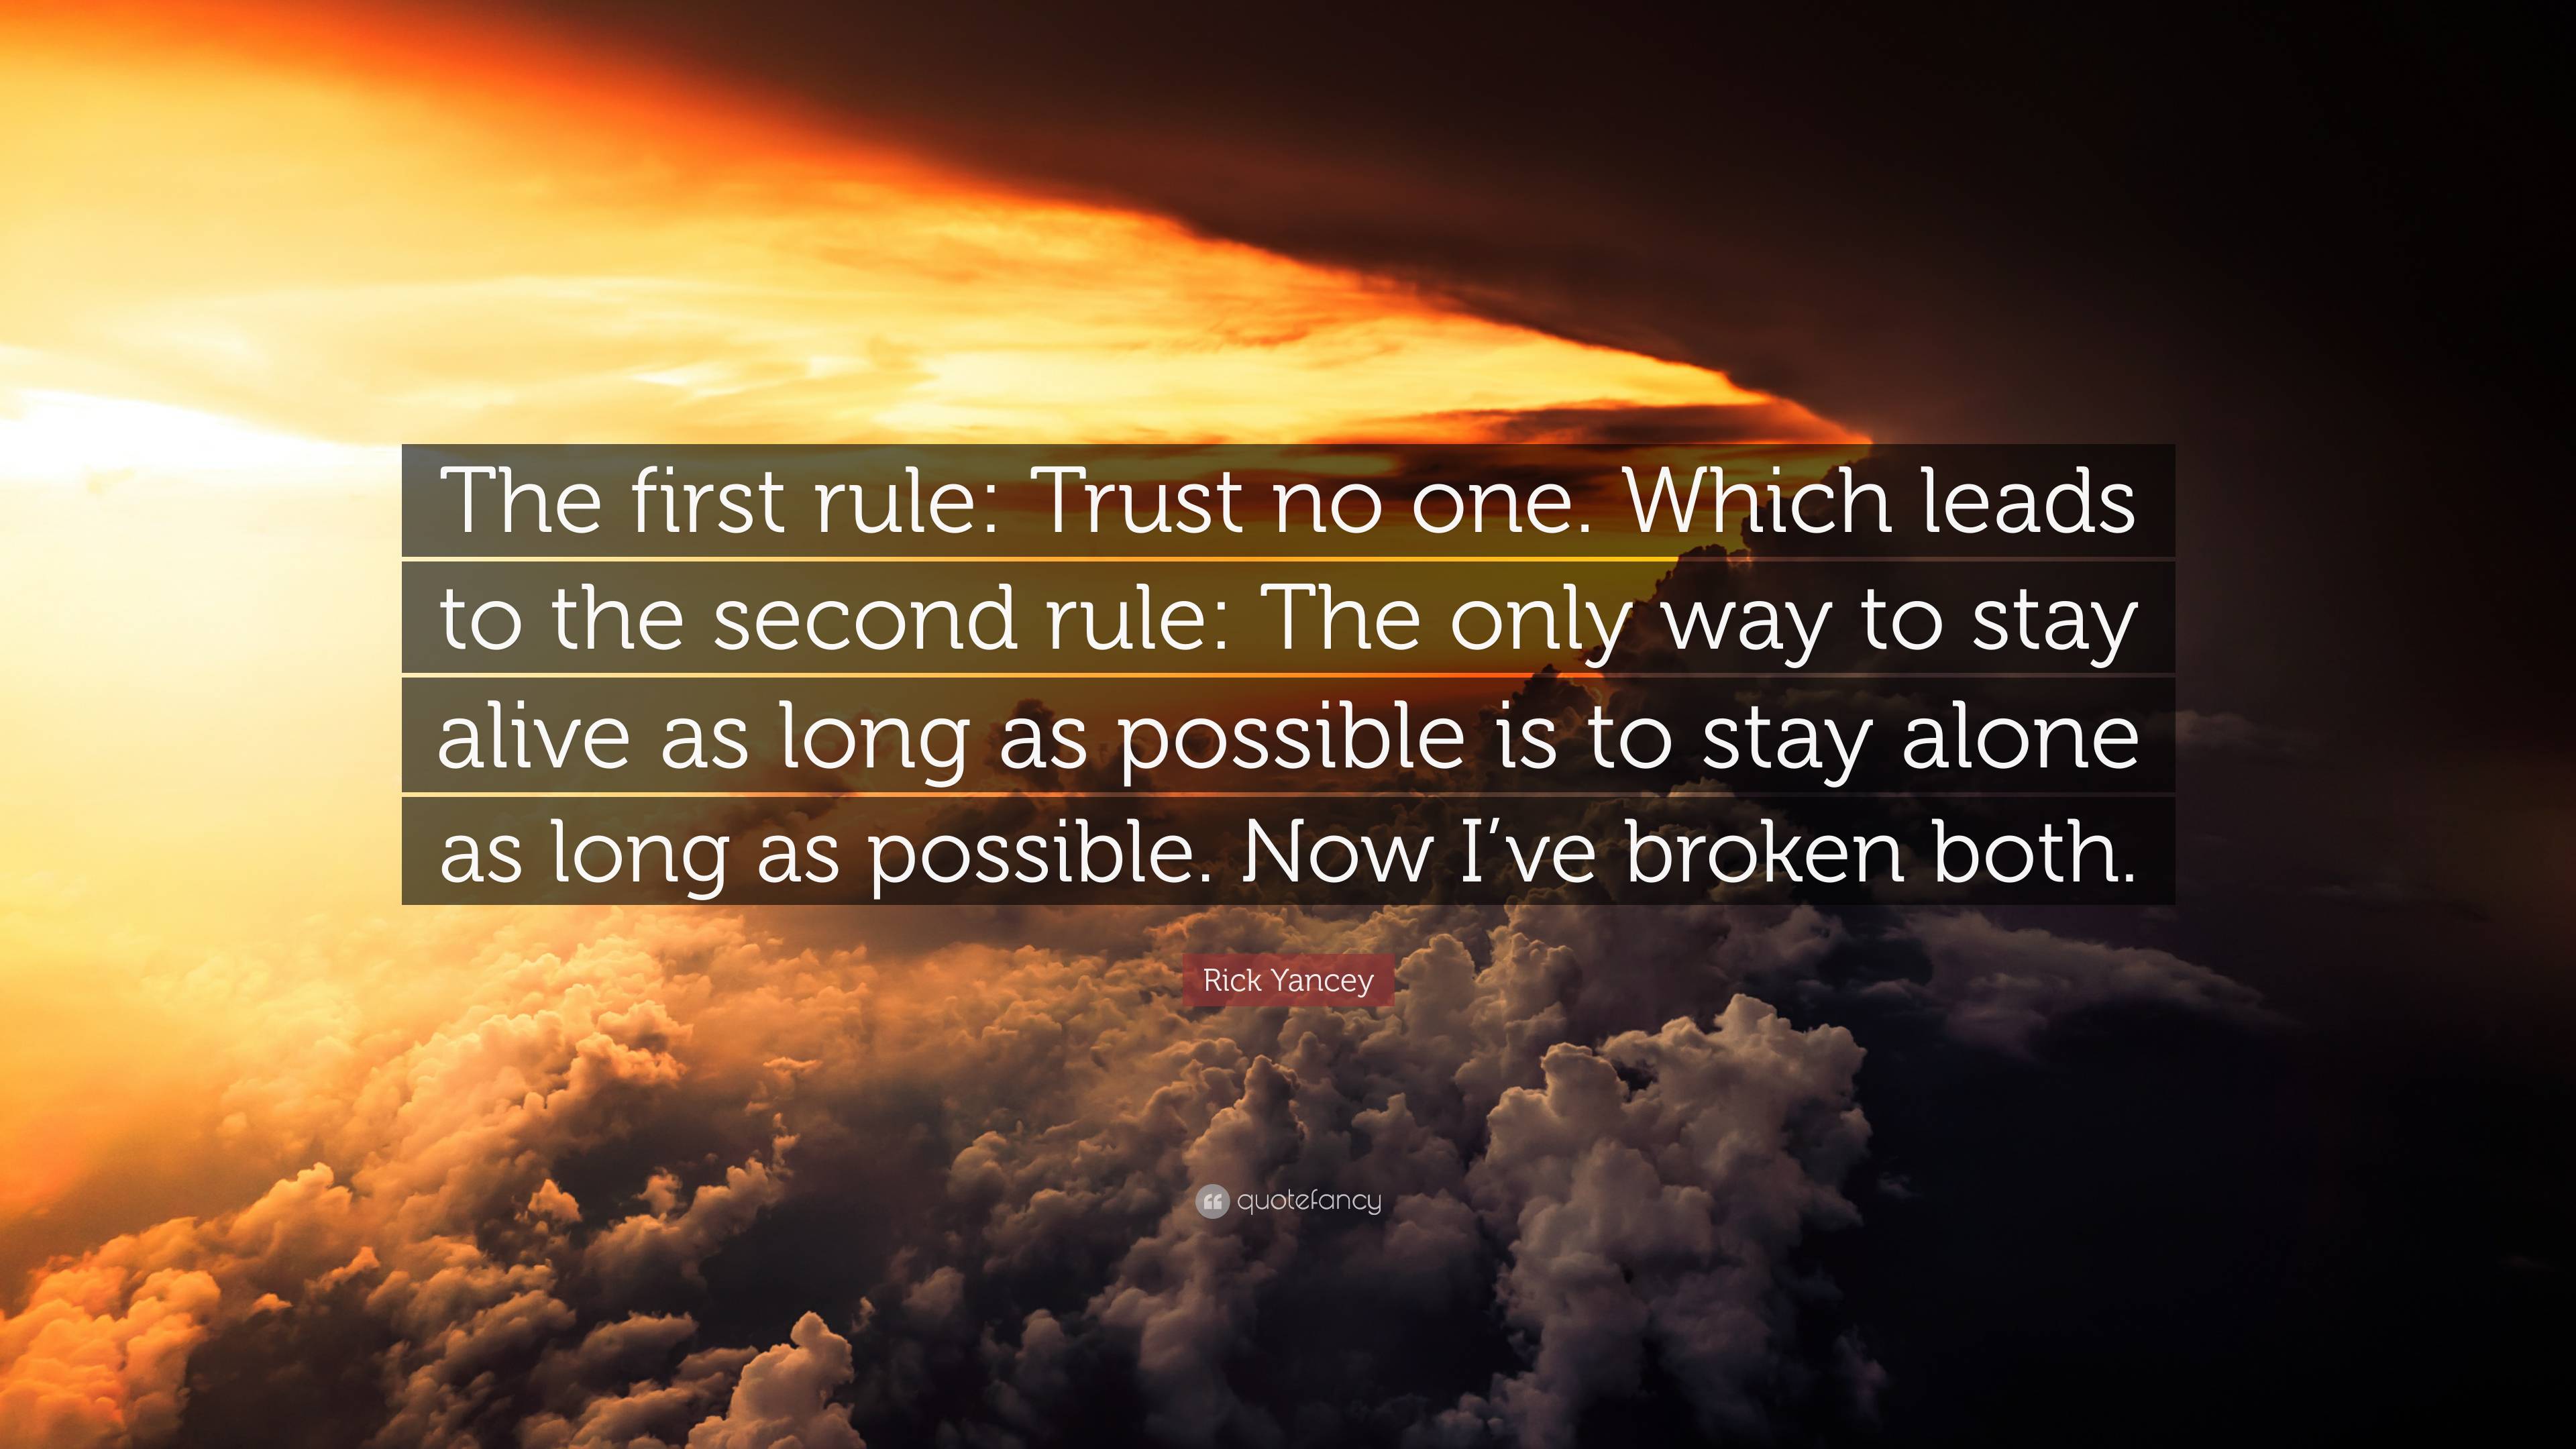 Rick yancey quote âthe first rule trust no one which leads to the second rule the only way to stay alive as long as possible is to stay â